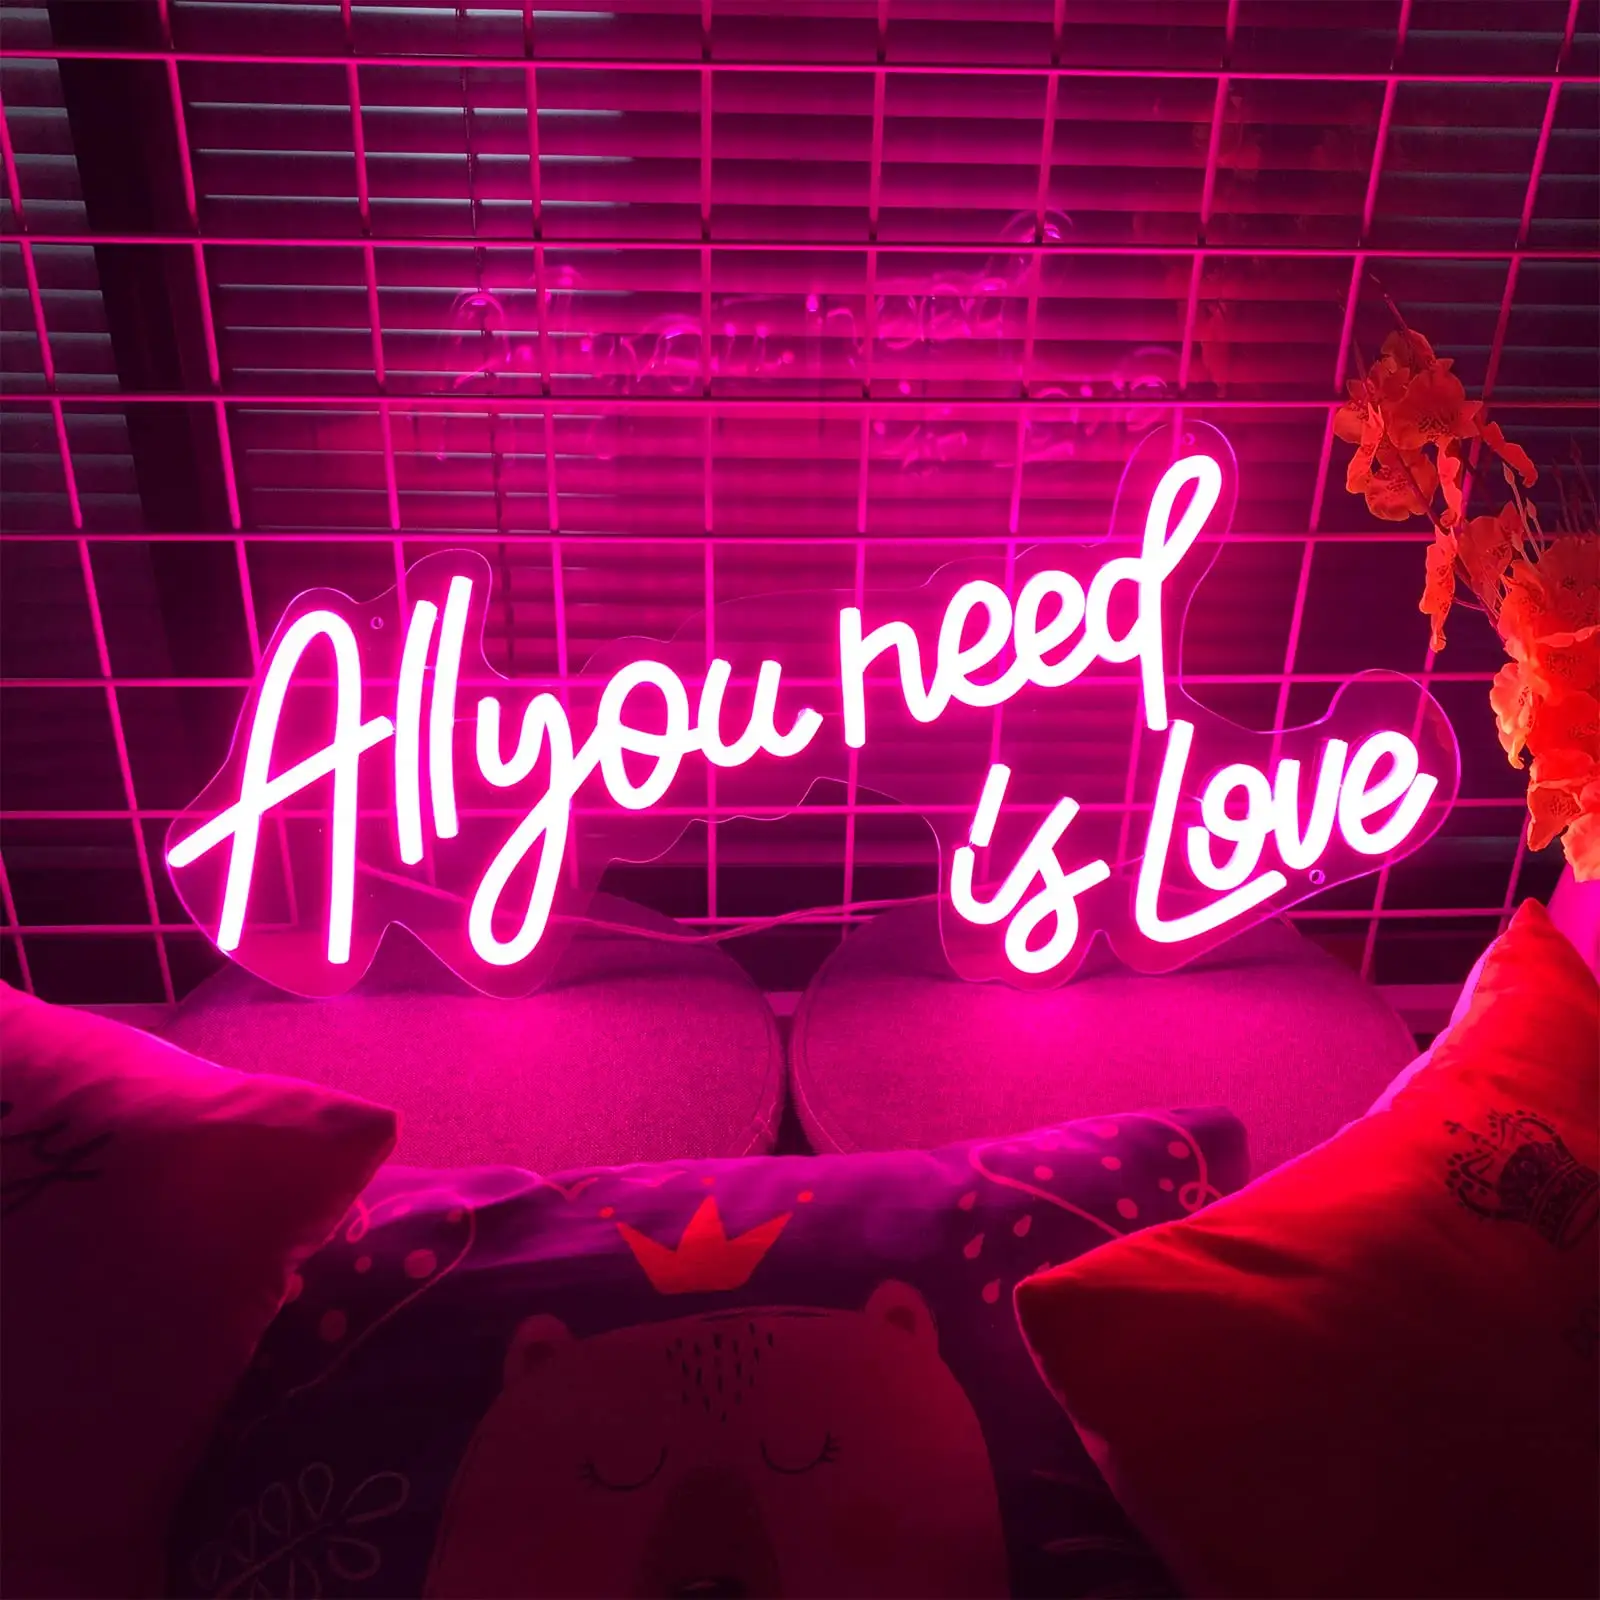 Neon Sign All You Need Is Love-LED Adjustable Brightness Flex Light Signs Indoor Bedroom Wall Decor Neon Light Party Wedding